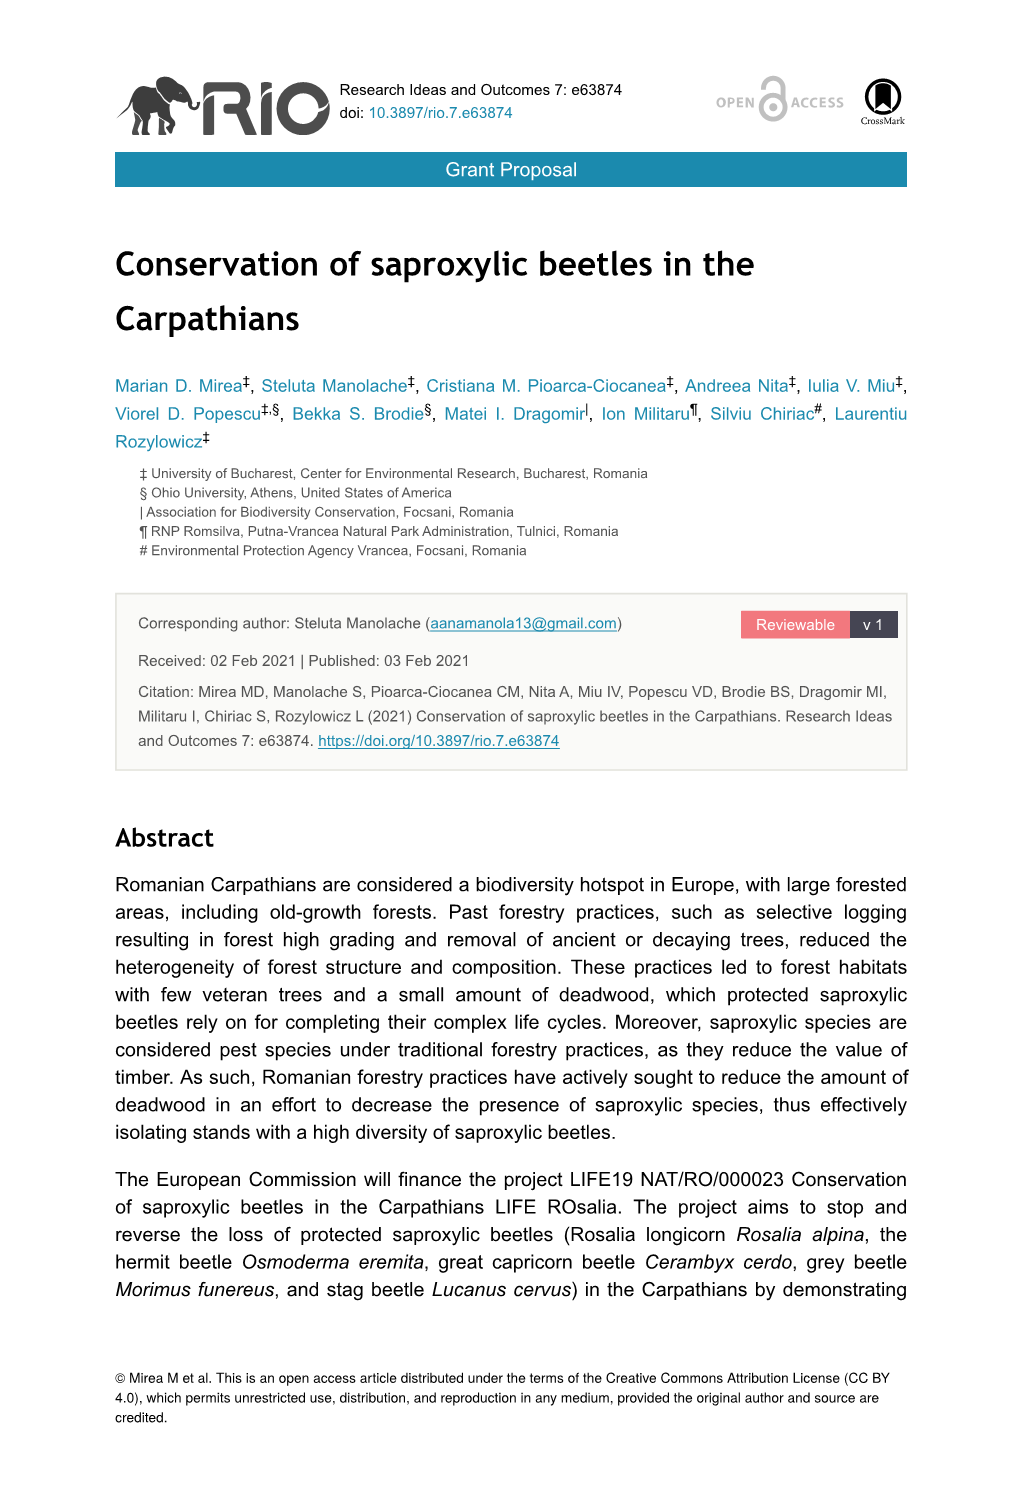 Conservation of Saproxylic Beetles in the Carpathians